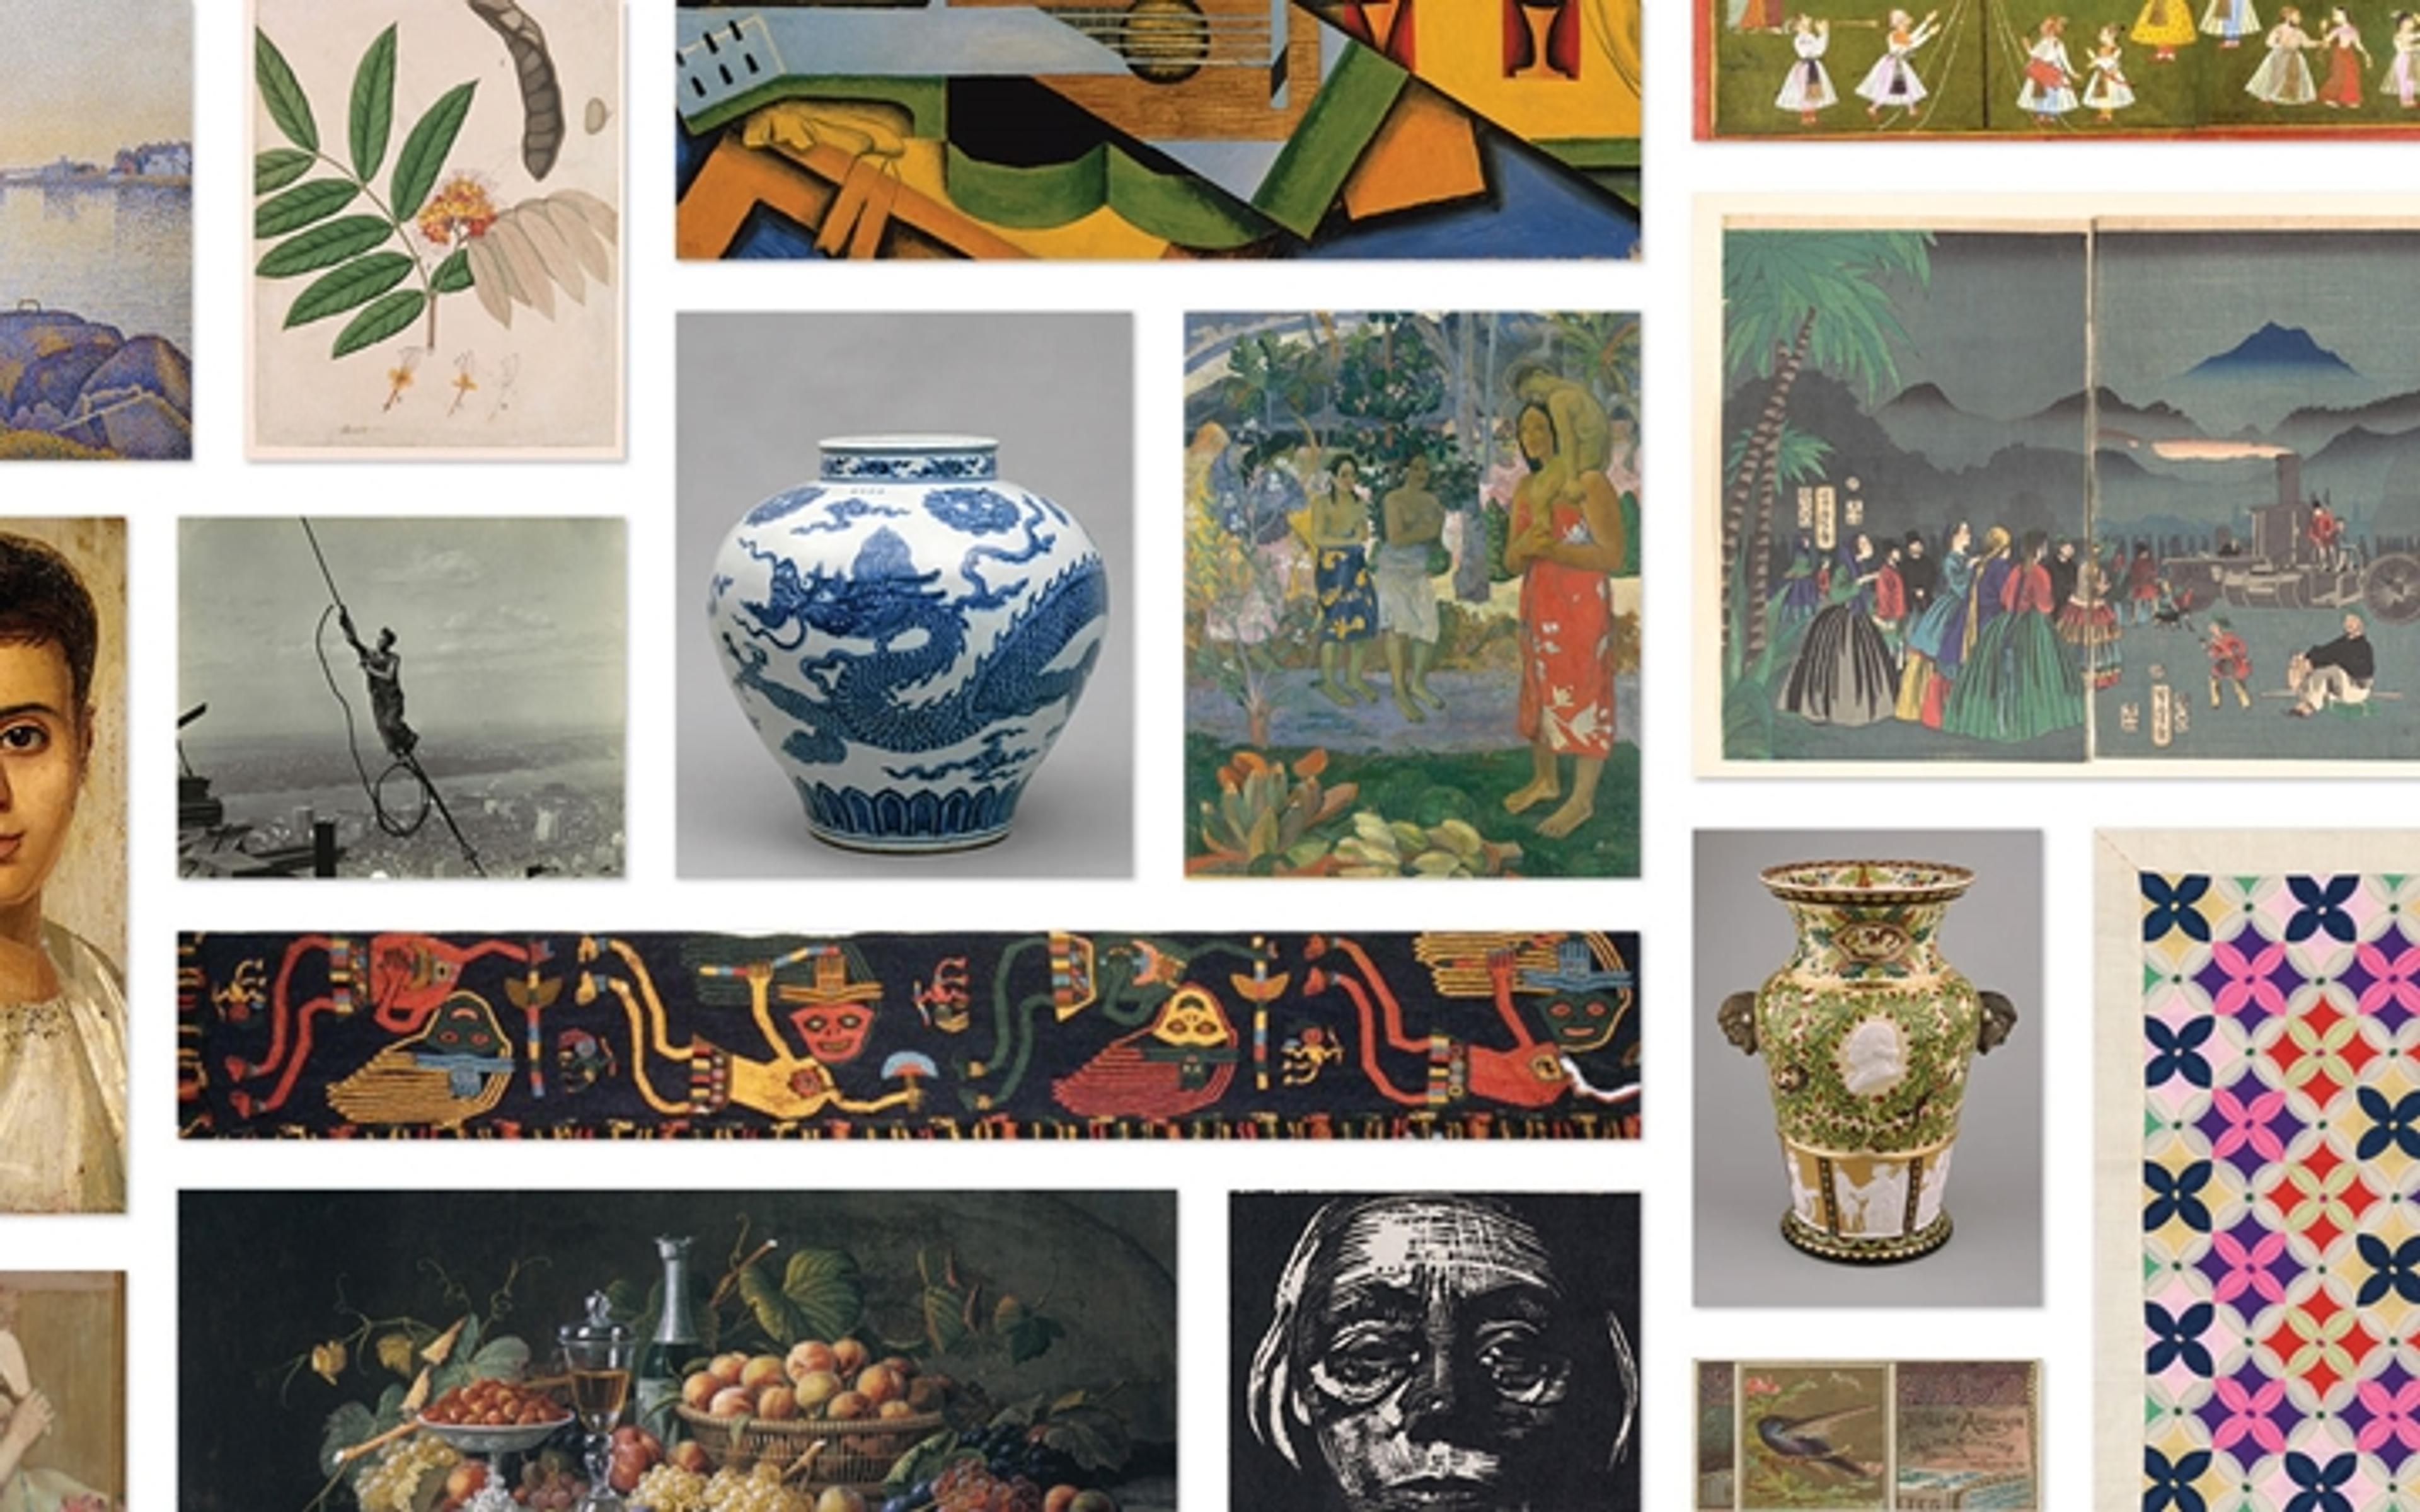 Collage of public-domain images in The Met collection